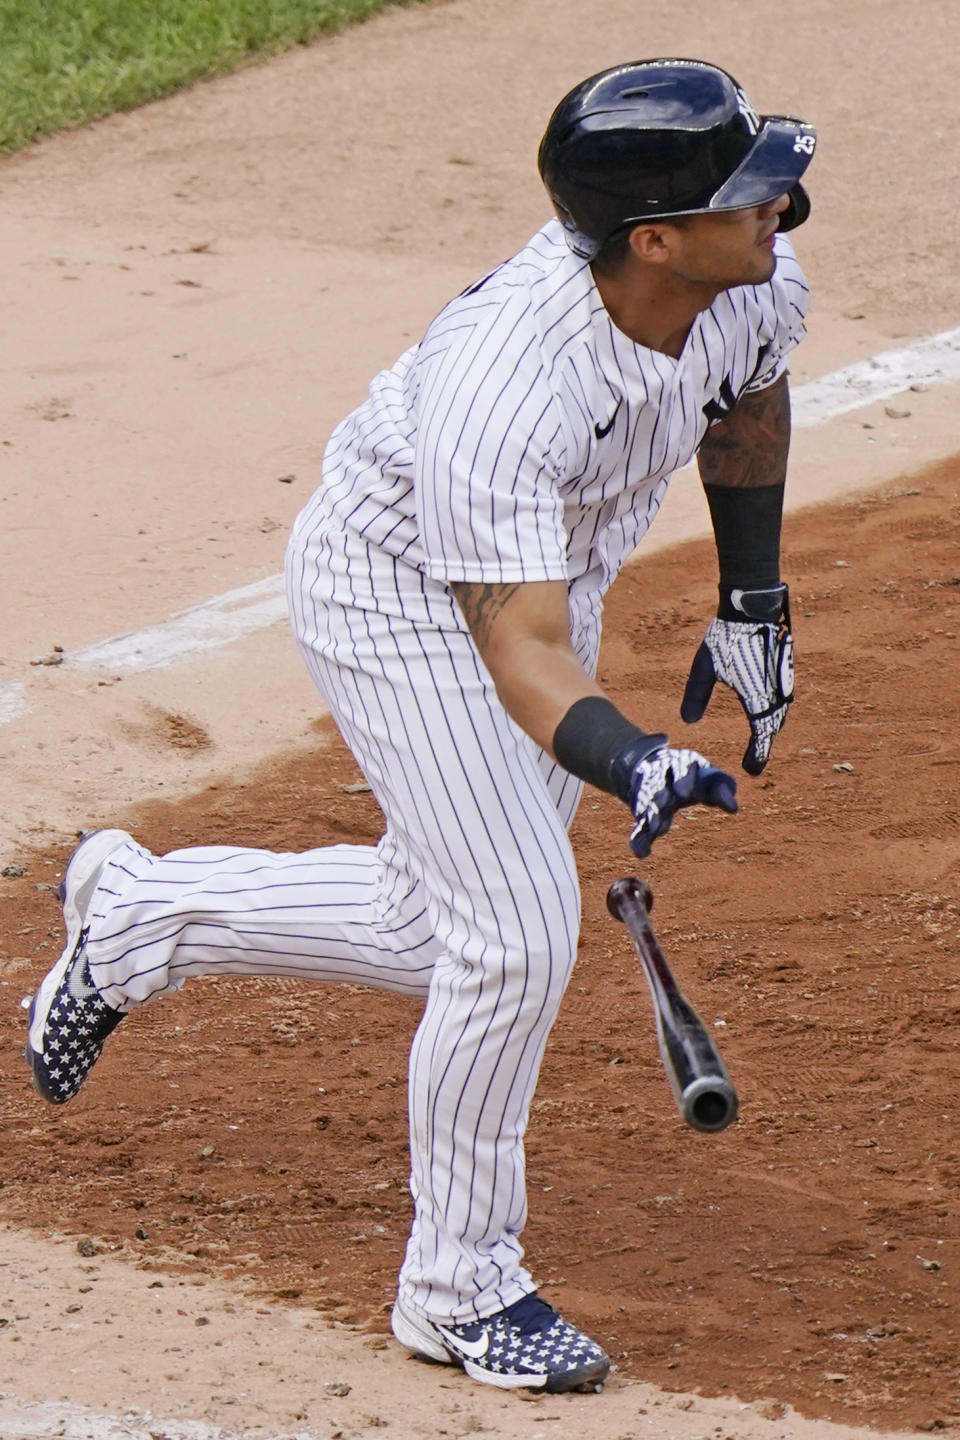 New York Yankees shortstop Gleyber Torres drops the bat as he watches his two-run double in the eighth inning of a baseball game against the Baltimore Orioles, Sunday, Sept. 13, 2020, at Yankee Stadium in New York. (AP Photo/Kathy Willens)